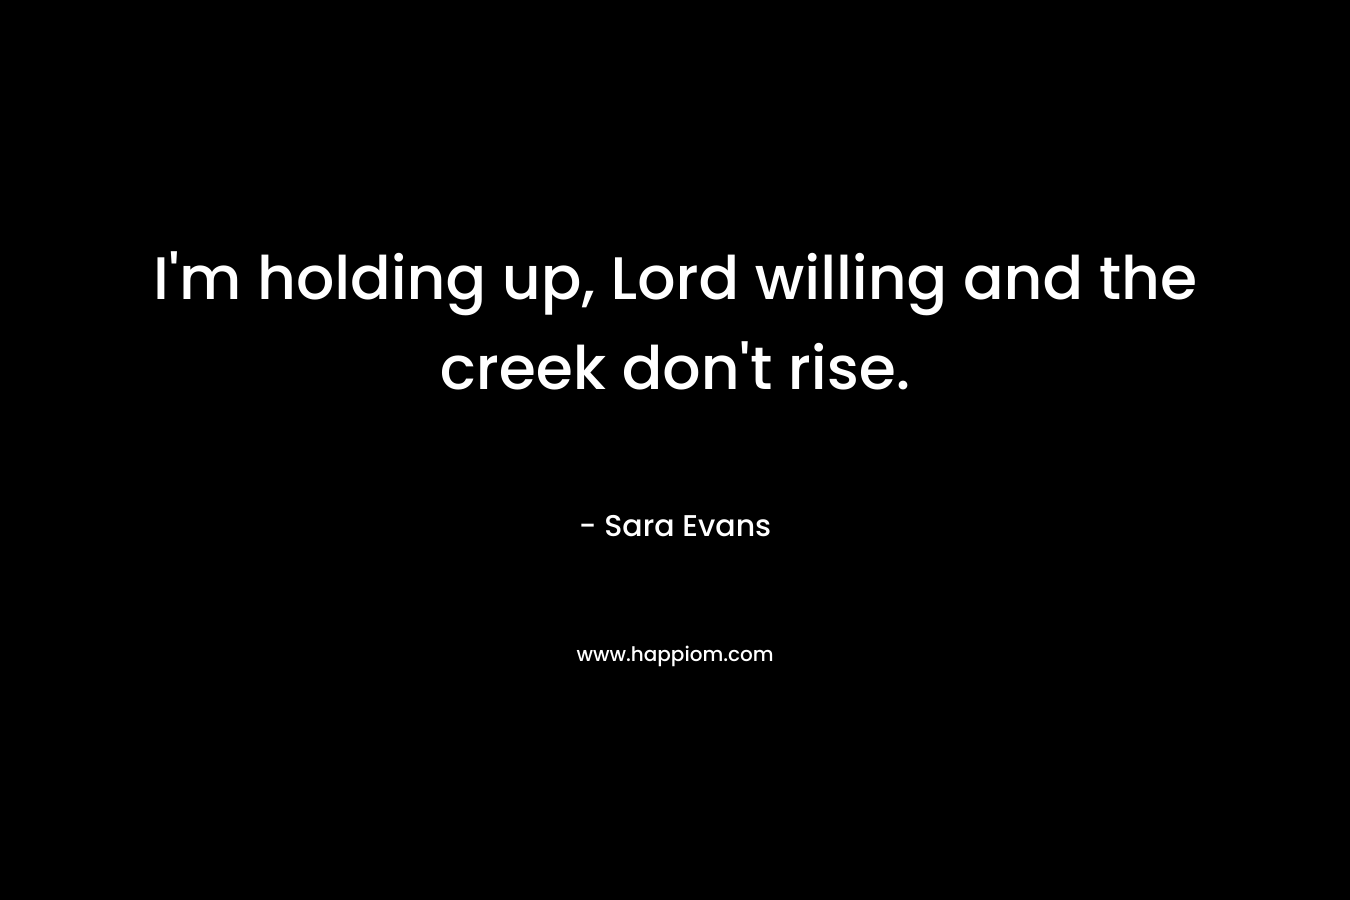 I’m holding up, Lord willing and the creek don’t rise. – Sara Evans